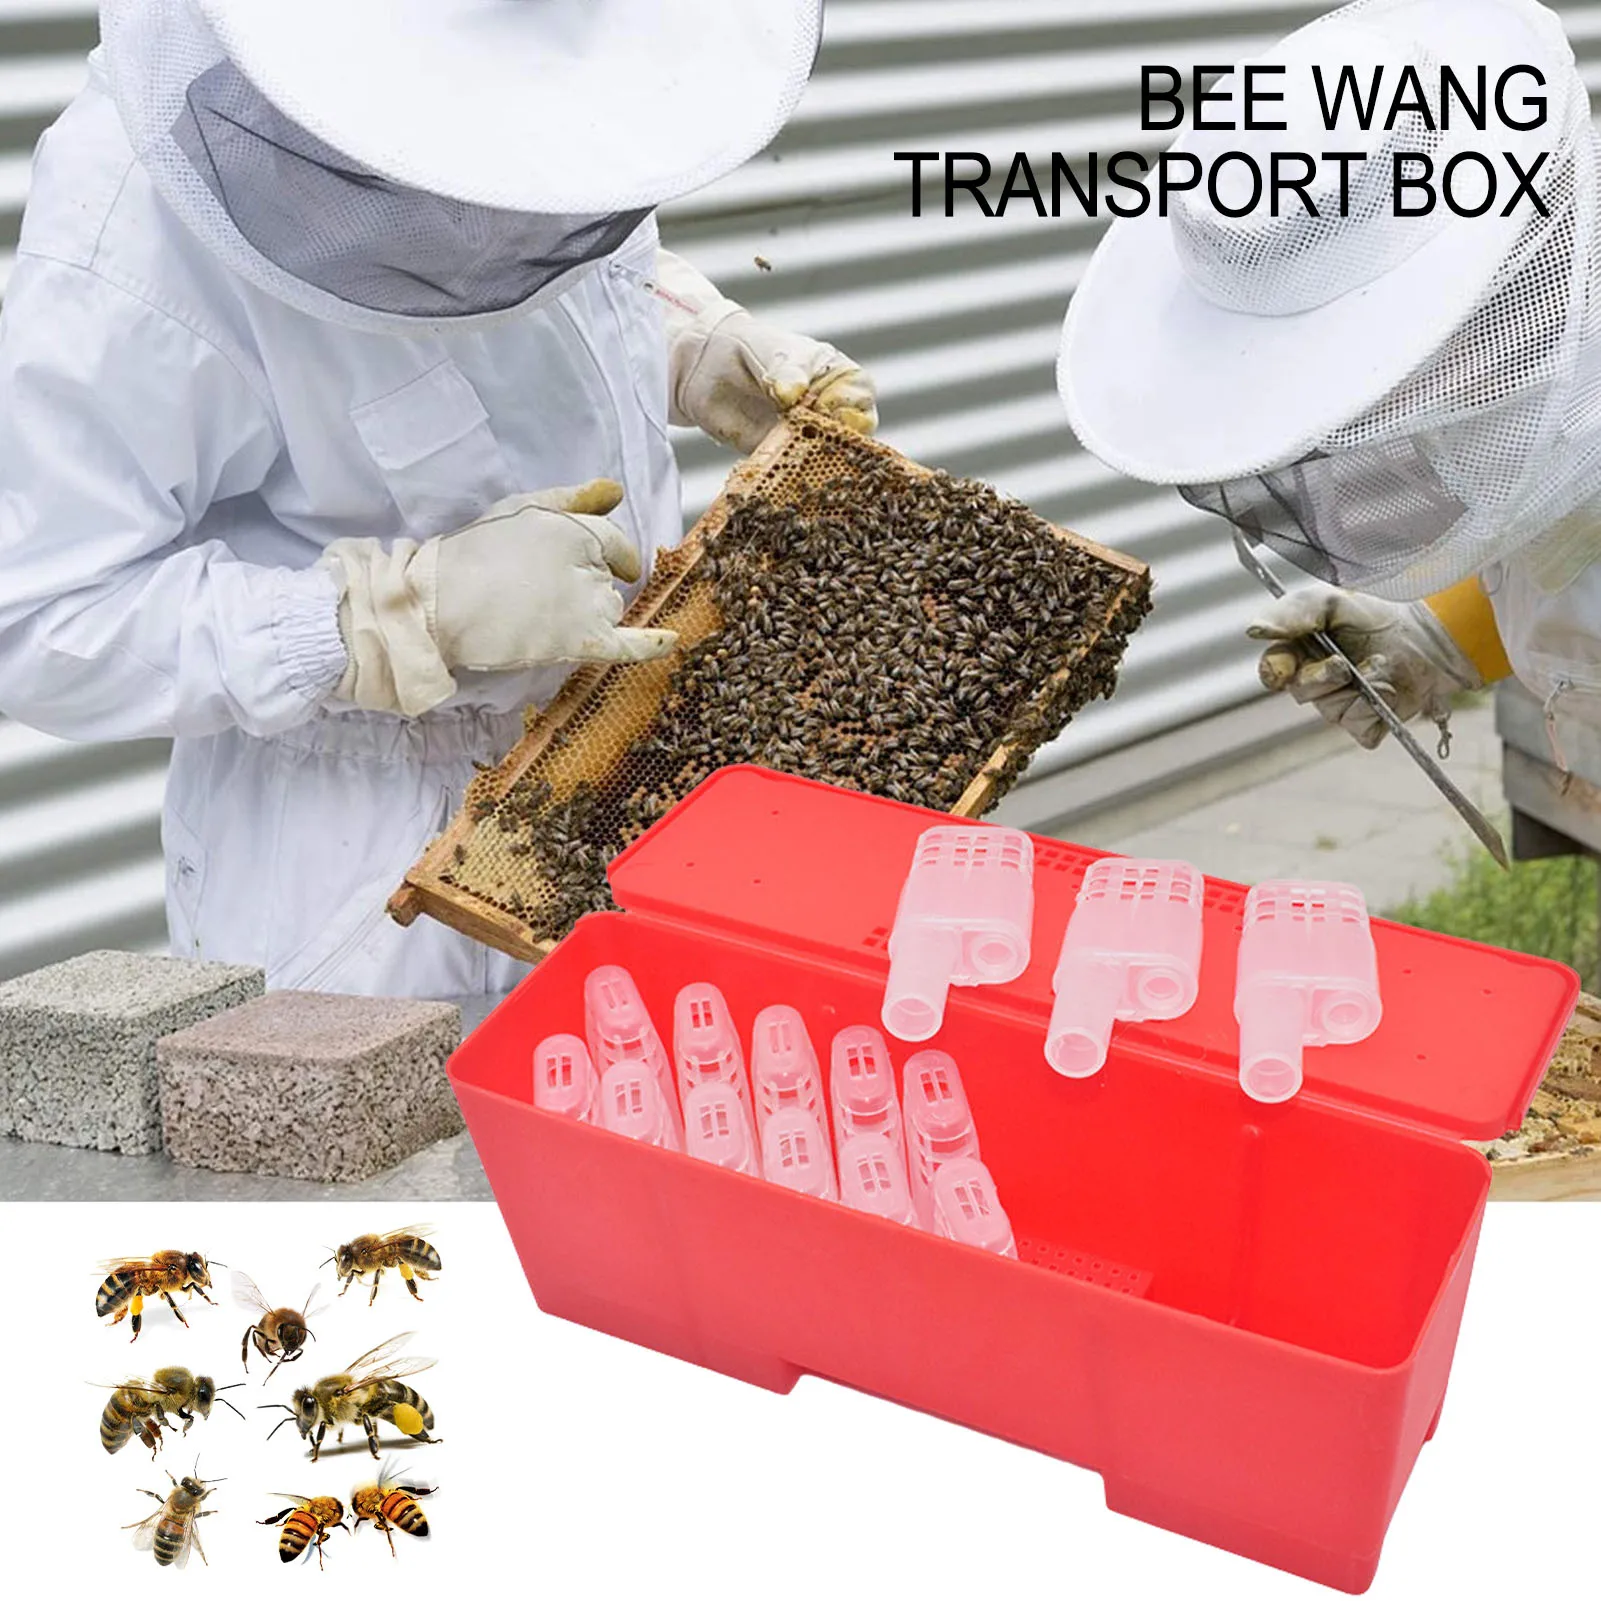 

Queen Bee Transport Box Bee Transport BoxBee Moving Isolator With Cages Beekeeper Rearing Tools 20 Queen Bee Cages